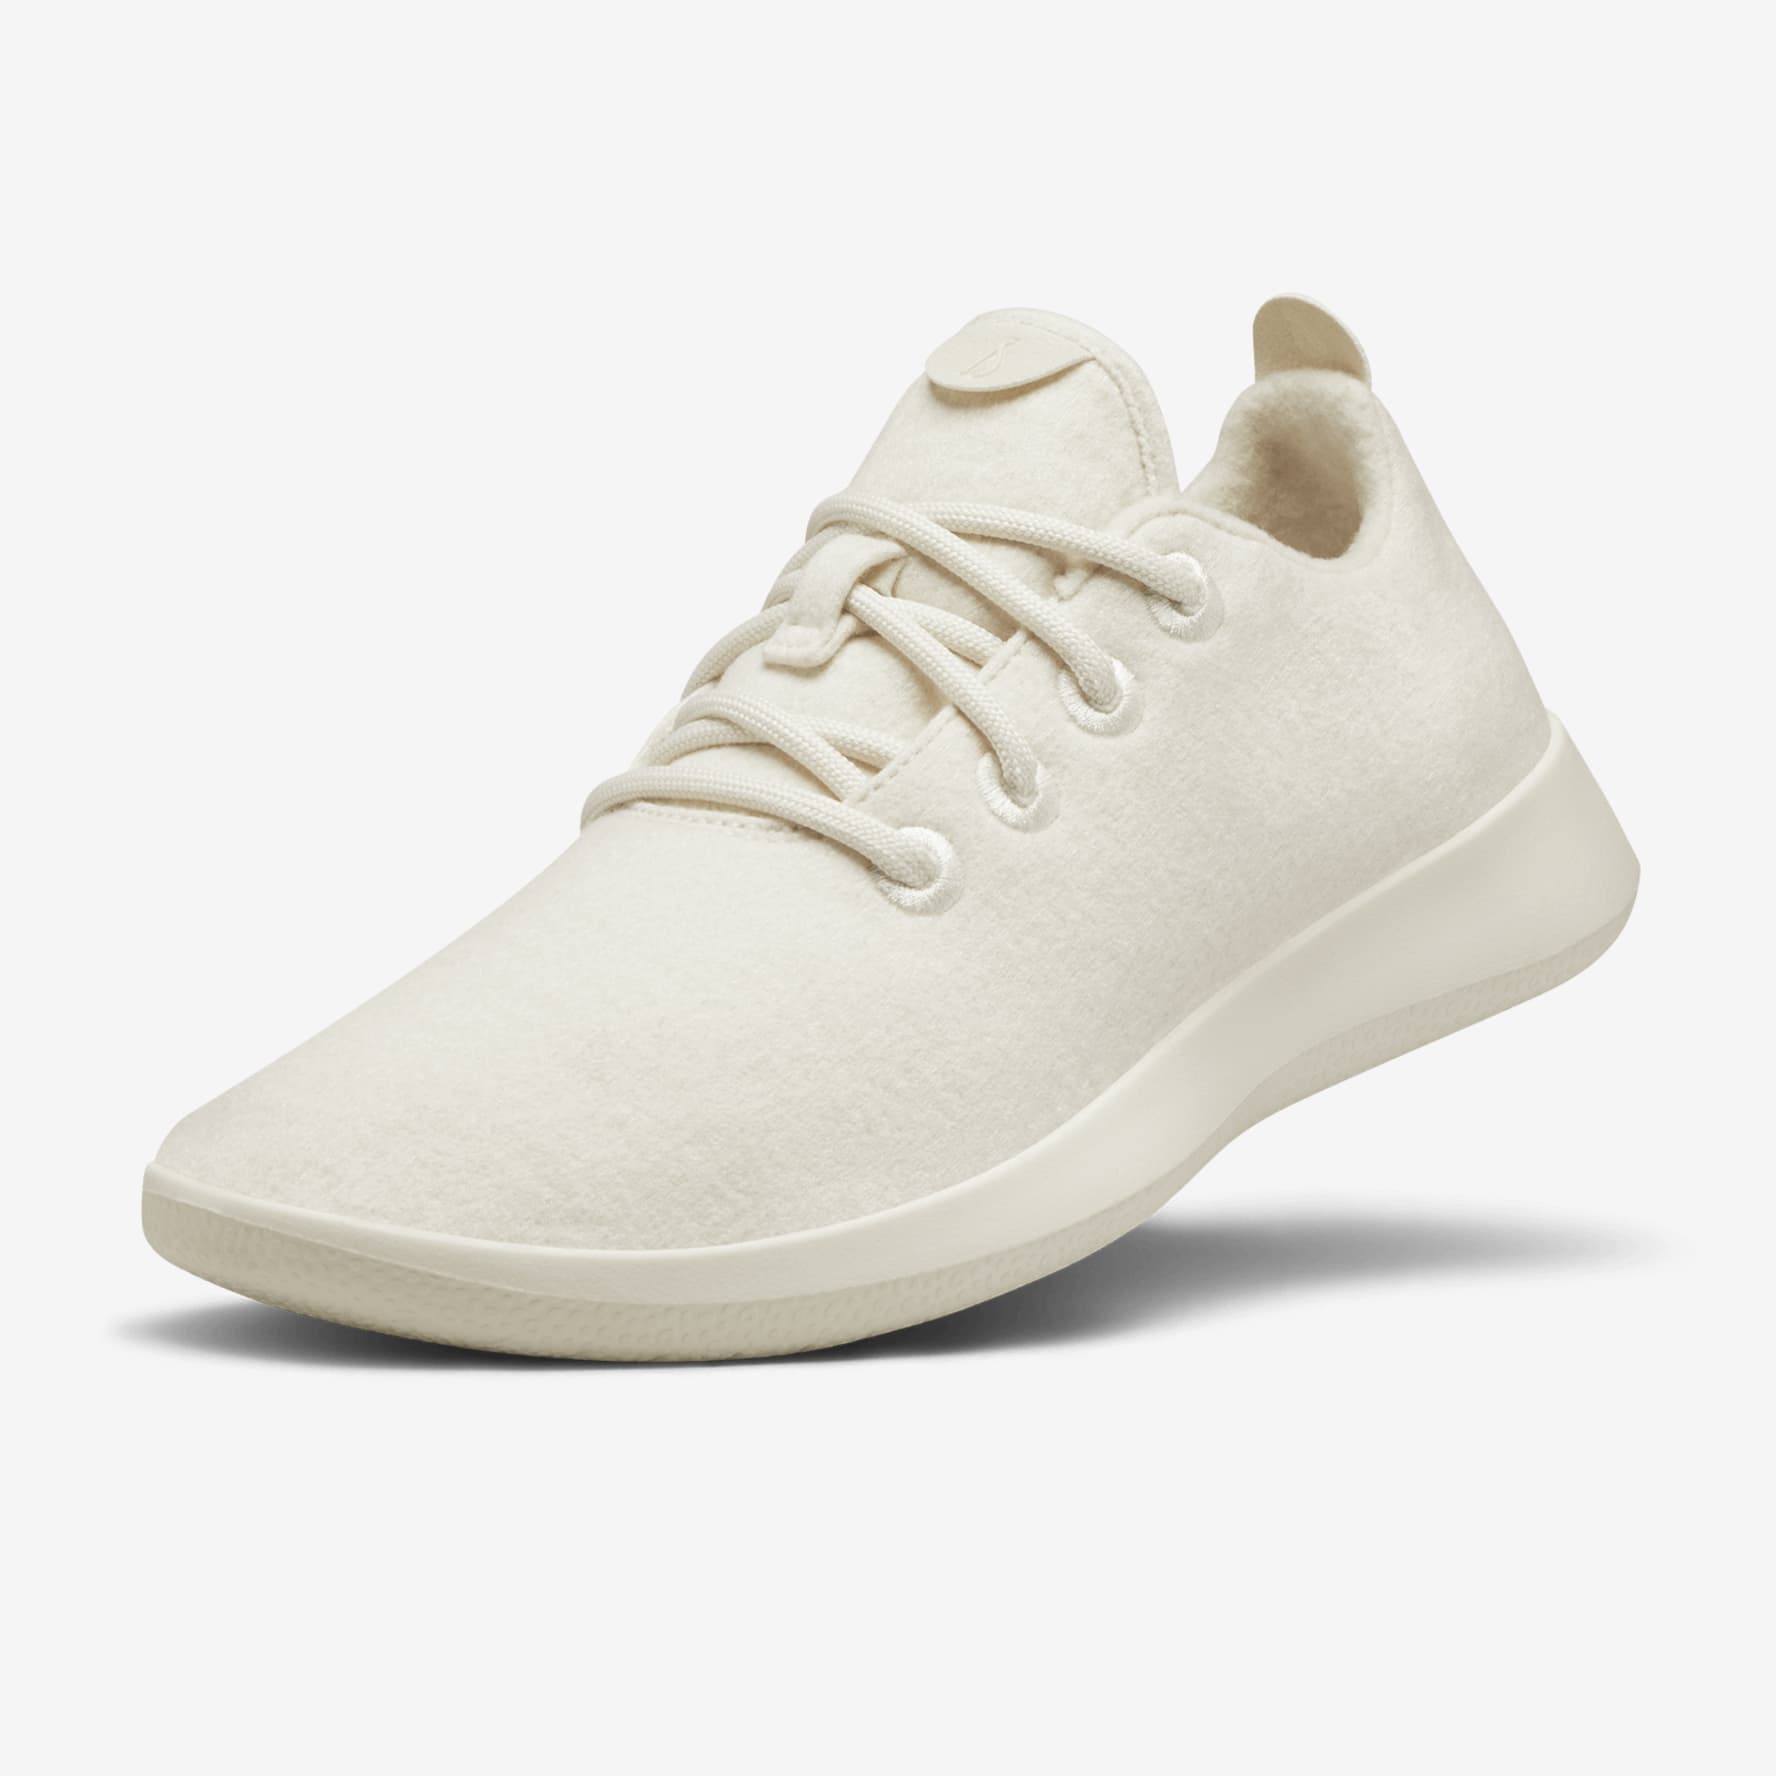 Allbirds Men's Wool Runners - Natural White (White with Cream Sole)